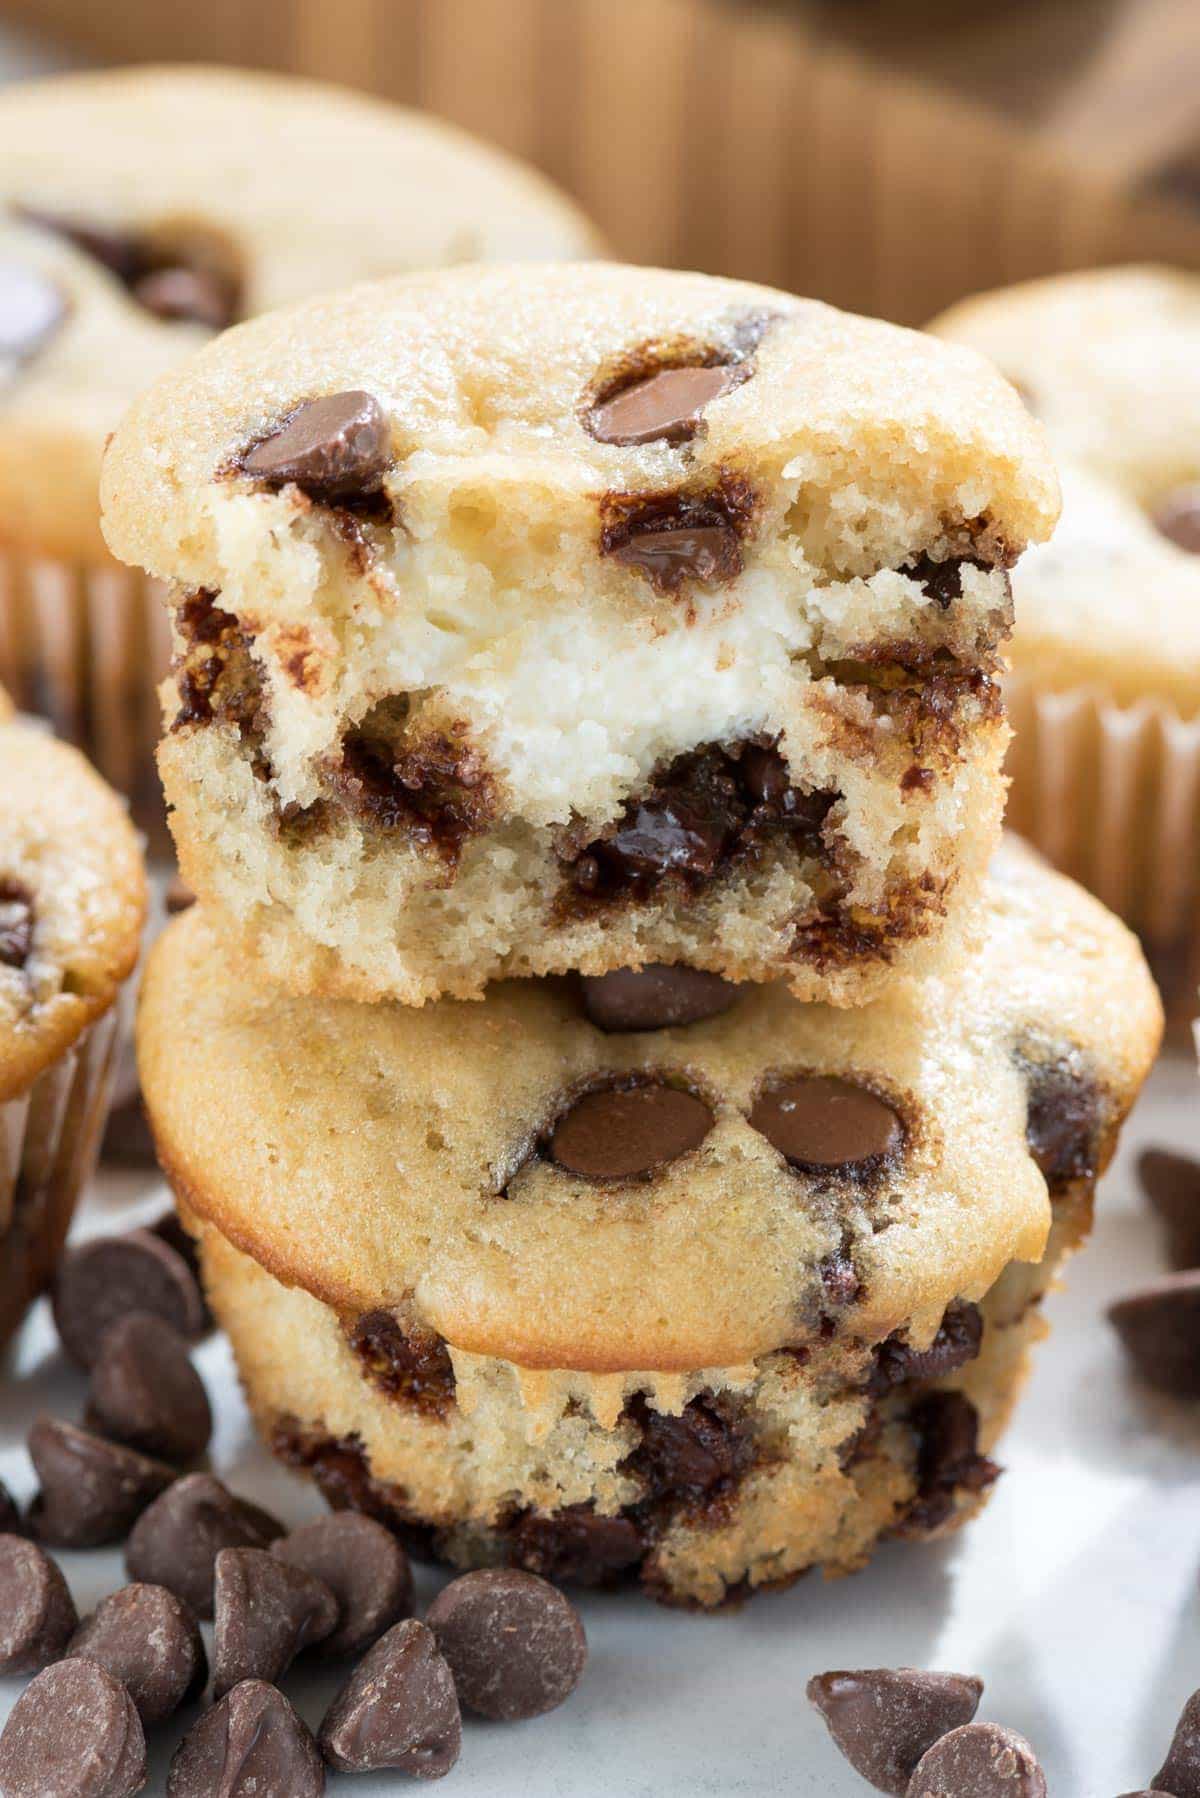 Cream Cheese Filled Chocolate Chip Muffins